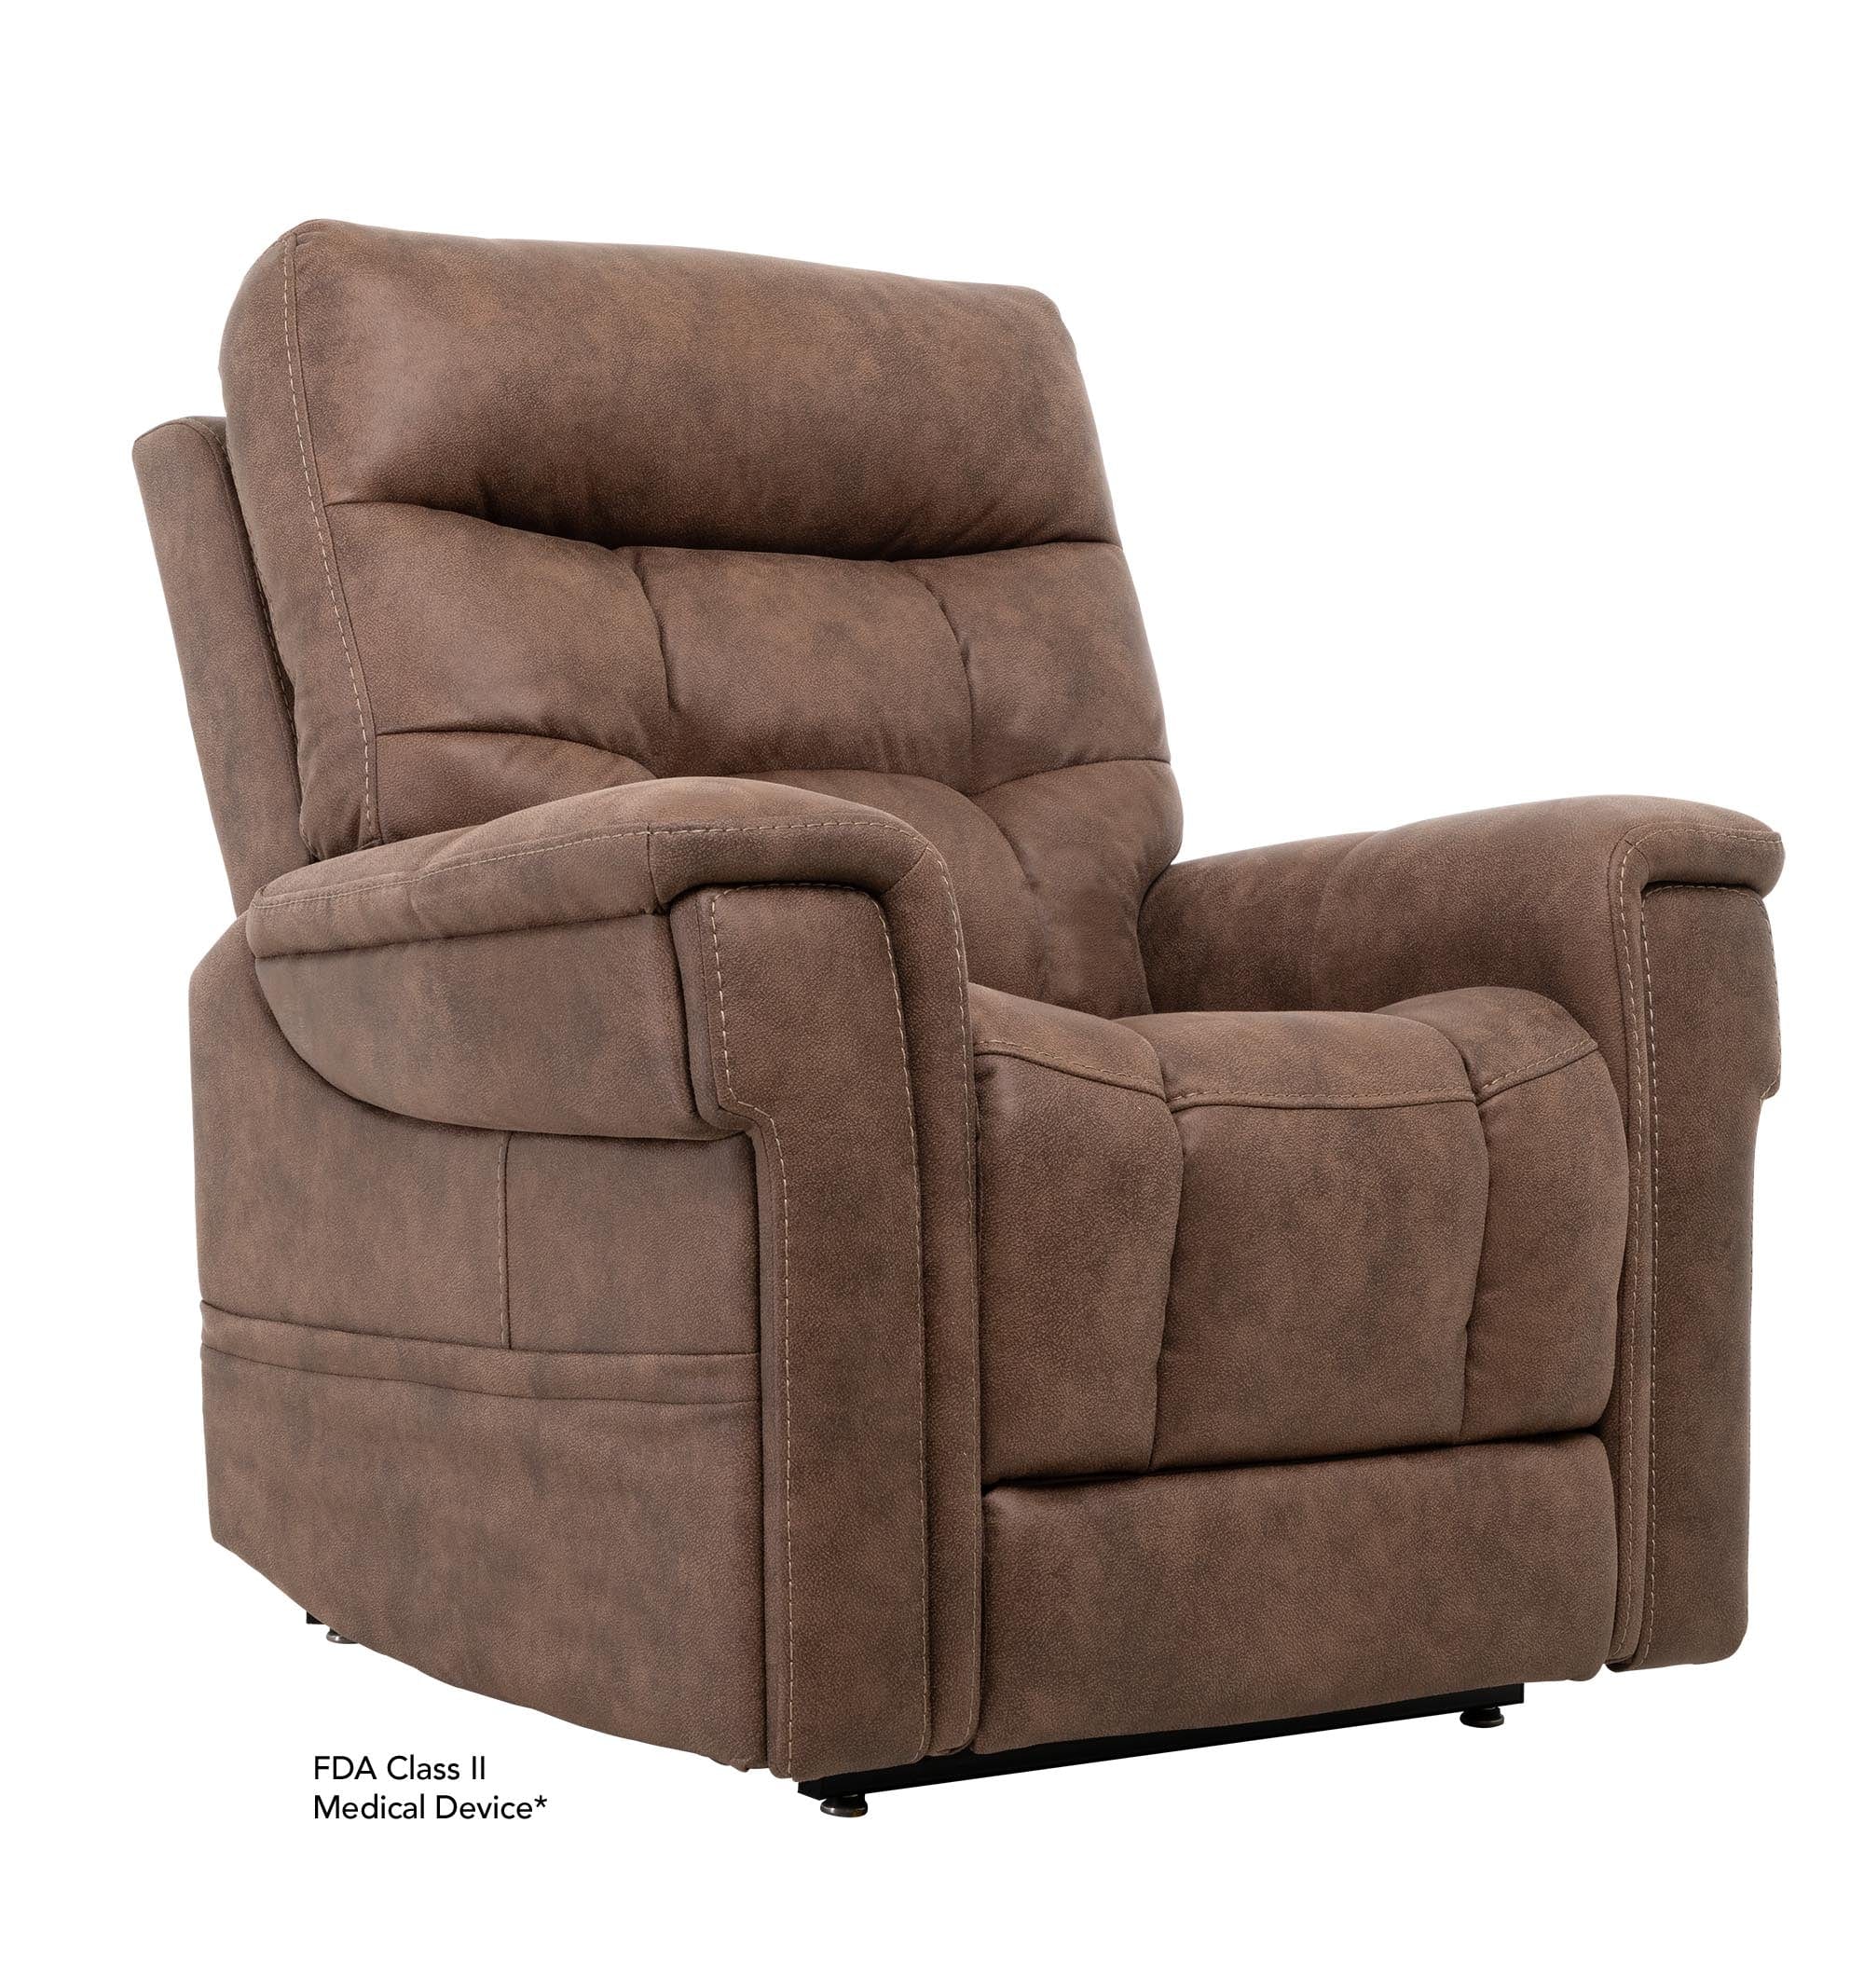 PRIDE Infinite Position Lift Chair Canyon Silt / Small (4' - 5' 3") Pride Vivalift! Radiance Lift Recliner